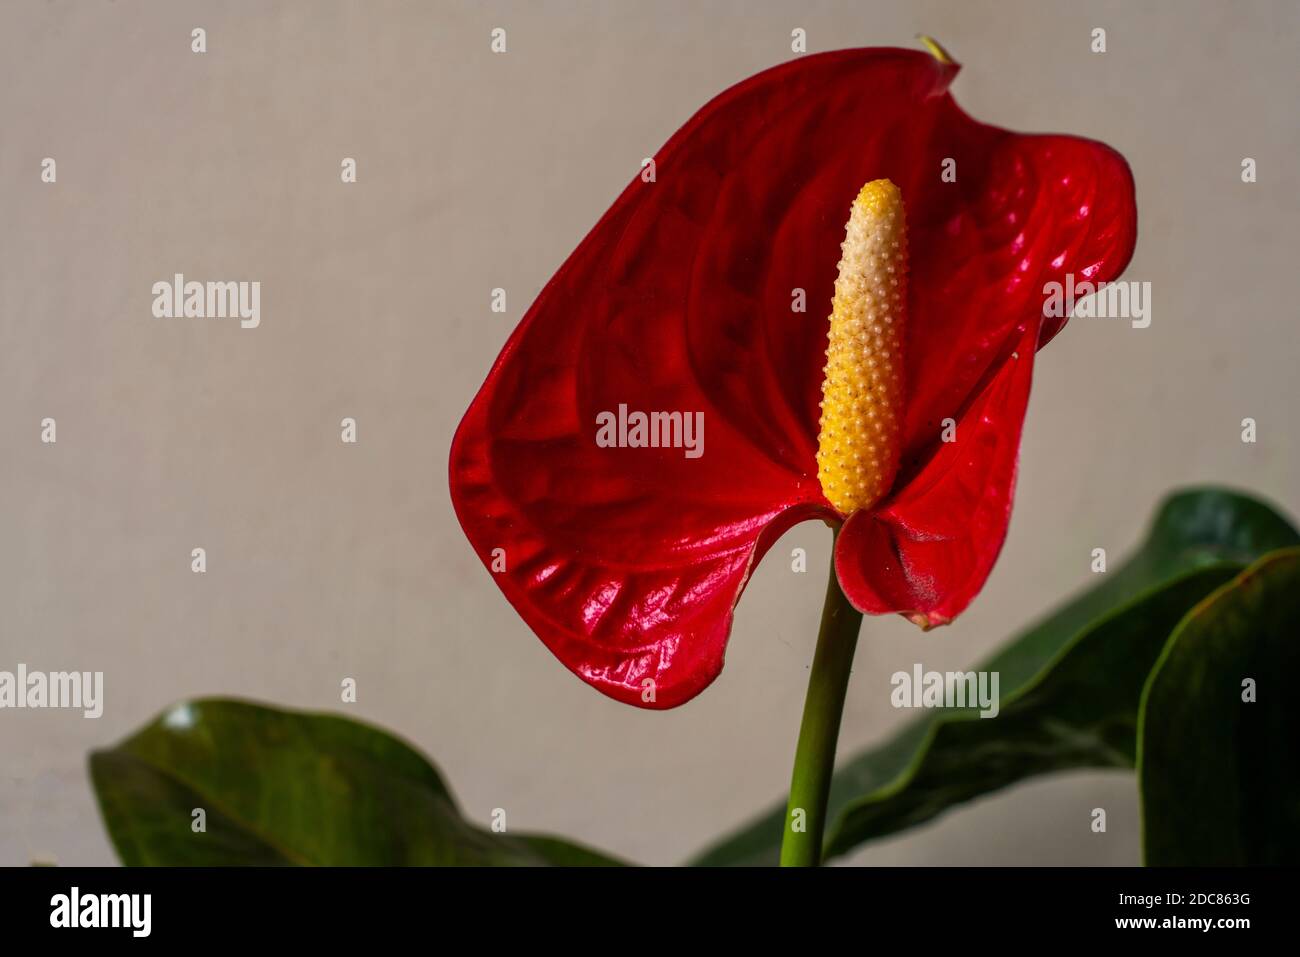 Anthurium is a heart-shaped flower. Anthuriums symbolize hospitality. Stock Photo